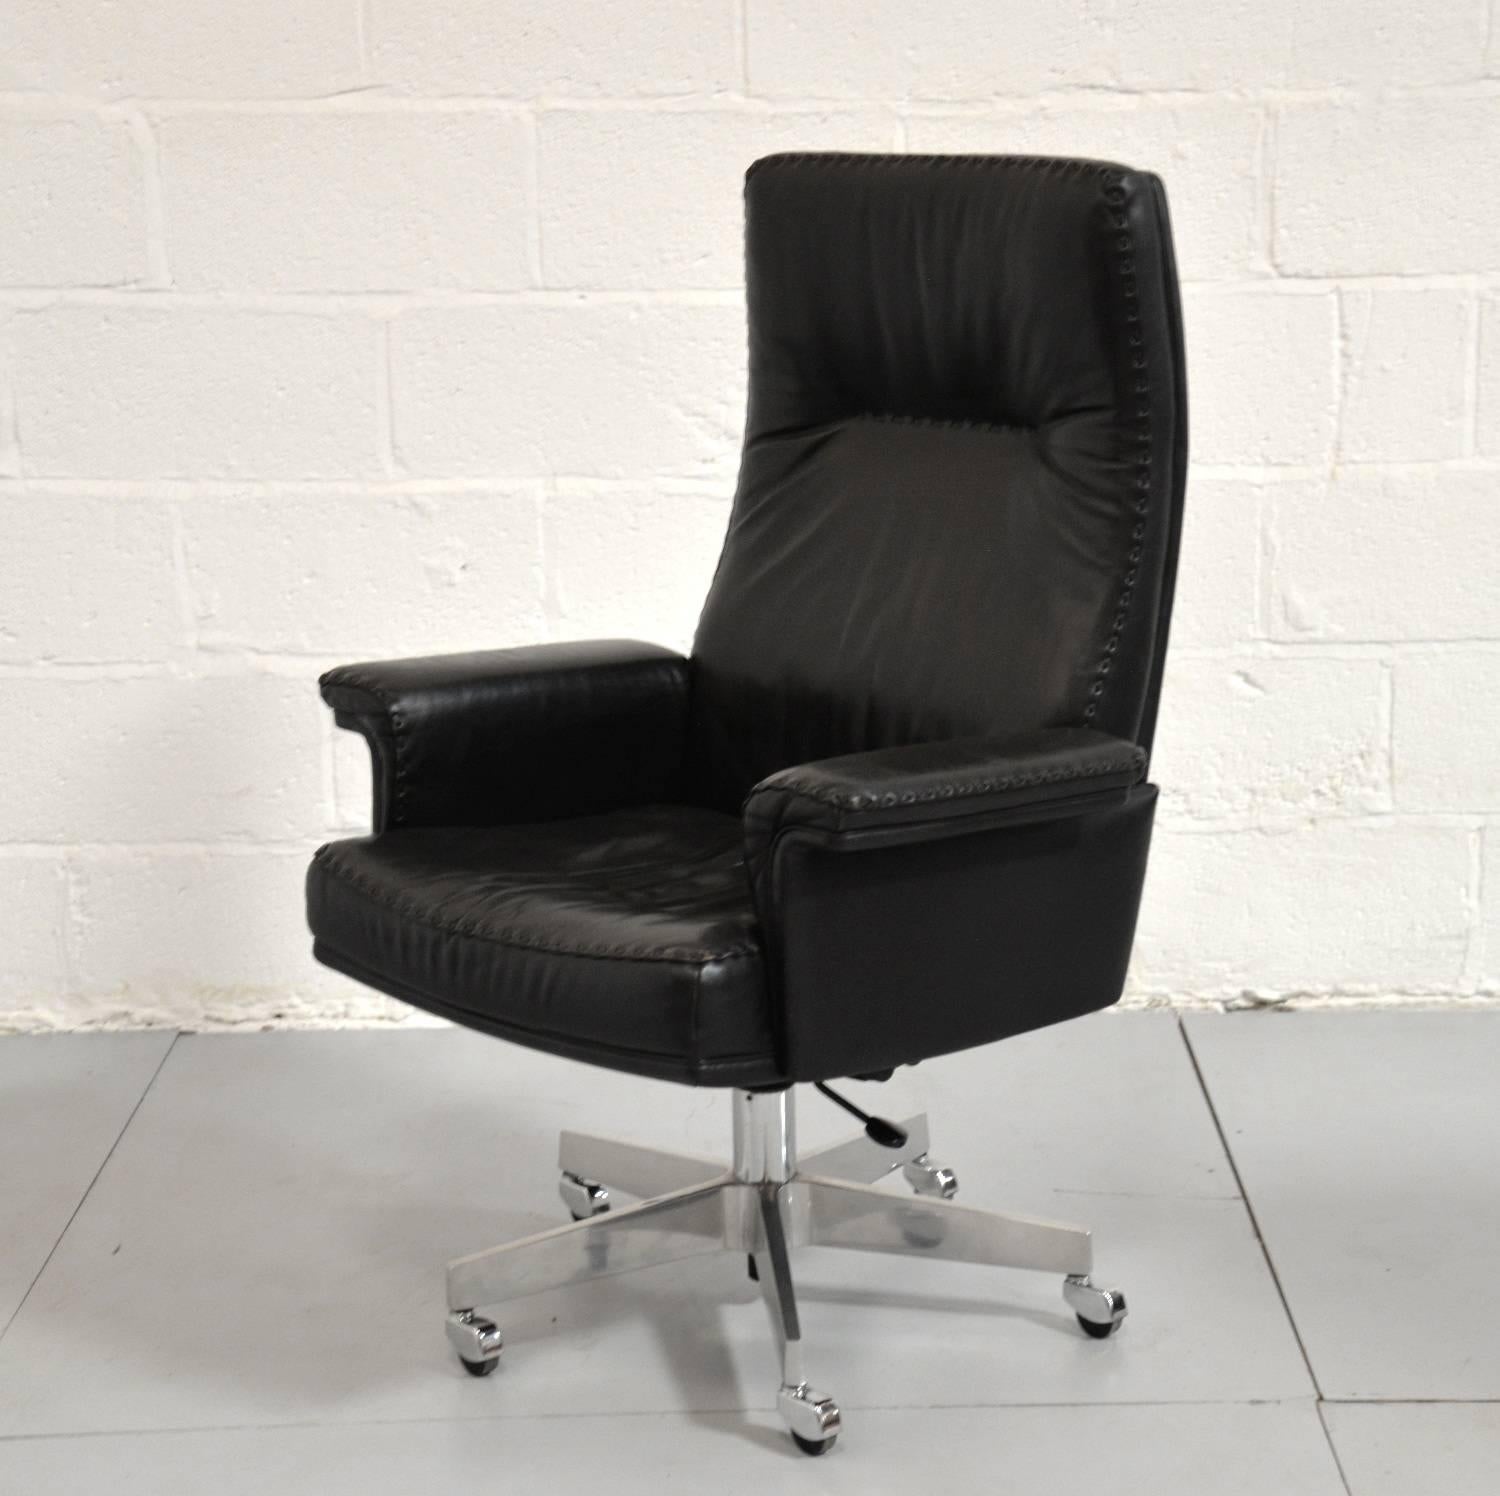 Discounted airfreight for our US and International customers (from two weeks door to door) 

We bring to you a extremely rare vintage De Sede DS 35 Executive armchair on casters. Hand built to incredibly high standards by De Sede craftsman in